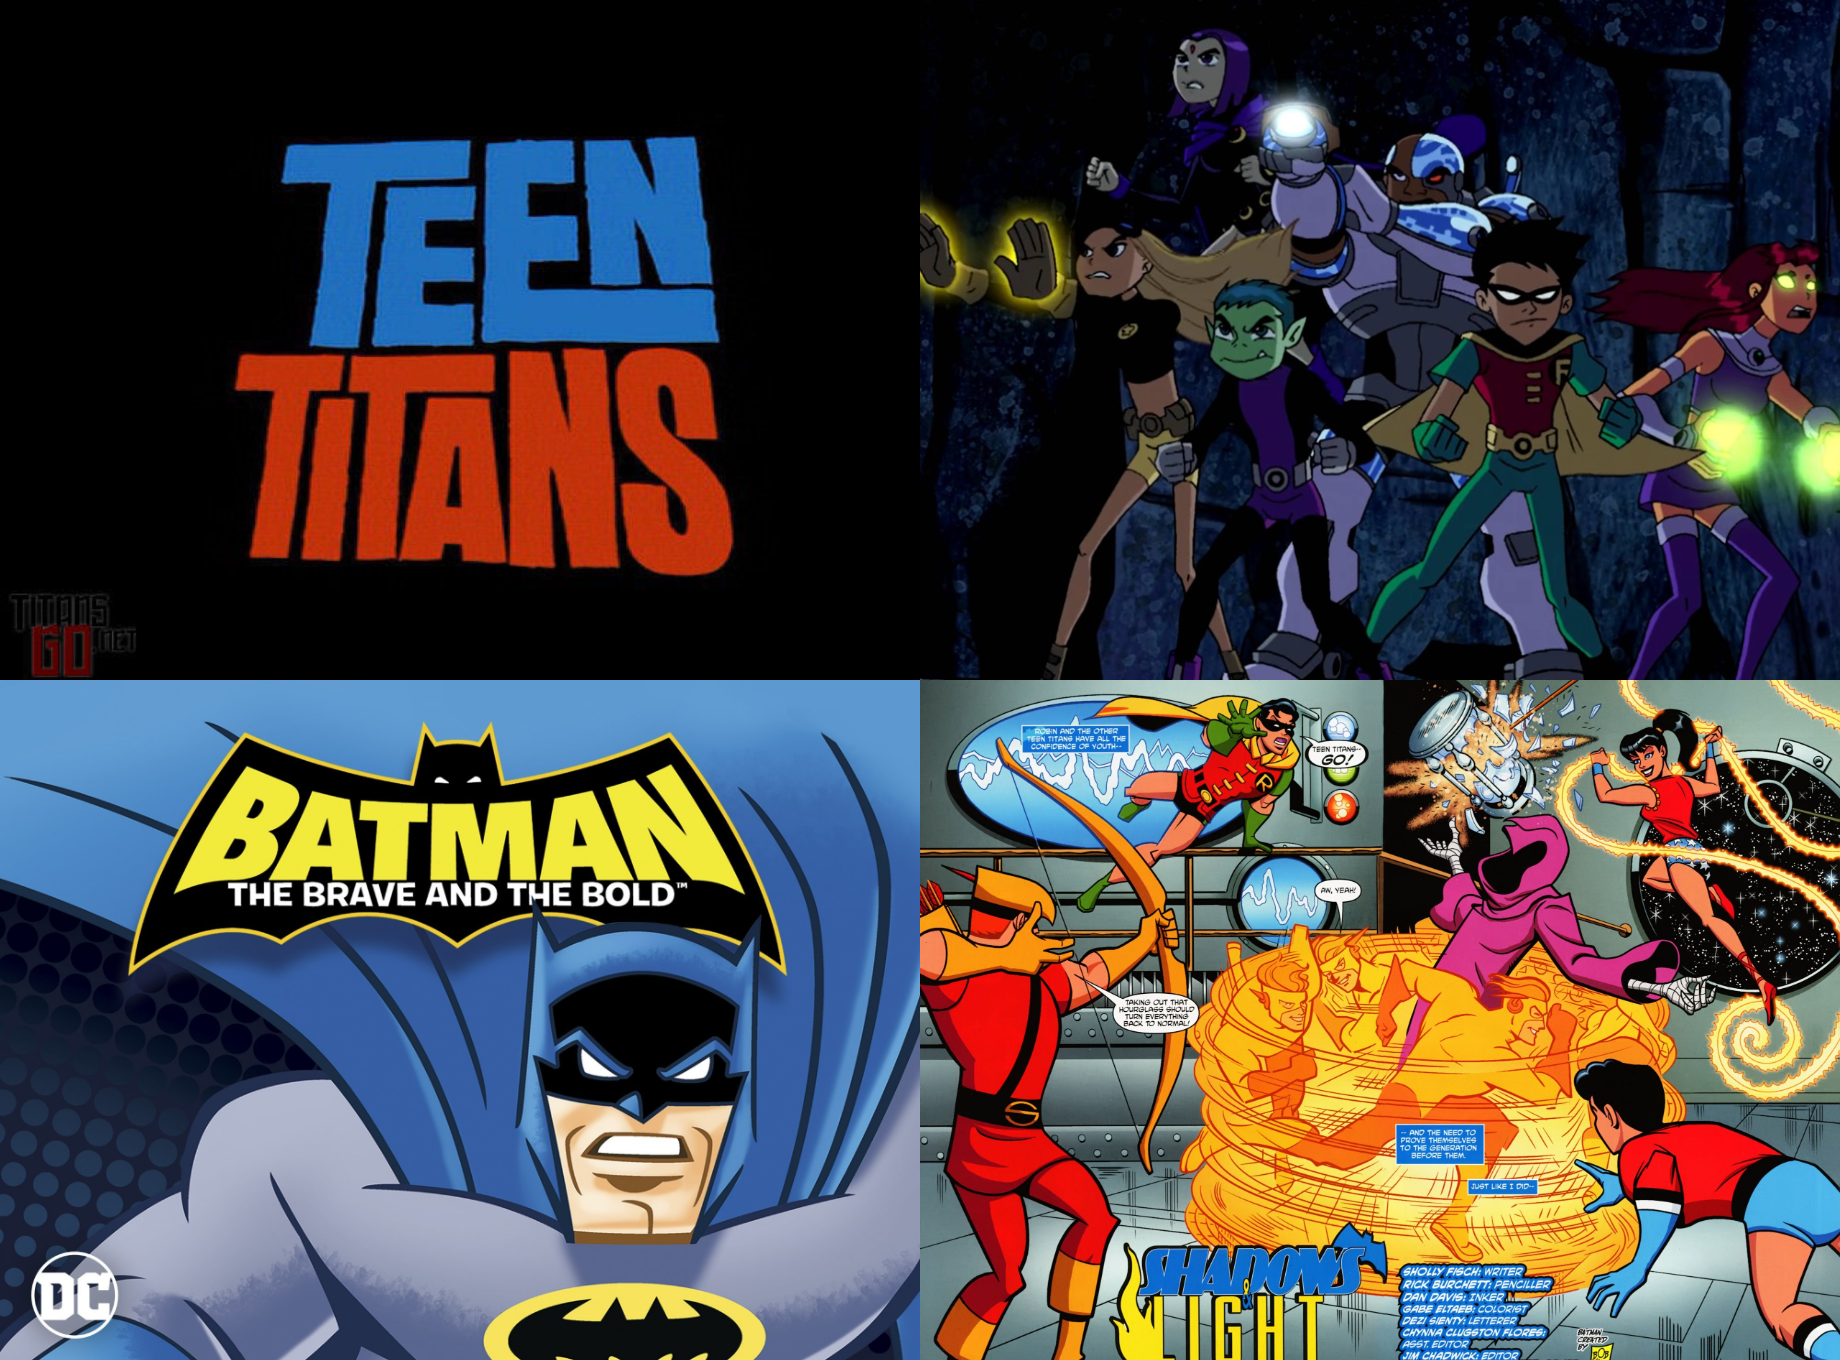 Six Animated Depictions - Teen Titans 3-4 by AdrenalineRush1996 on